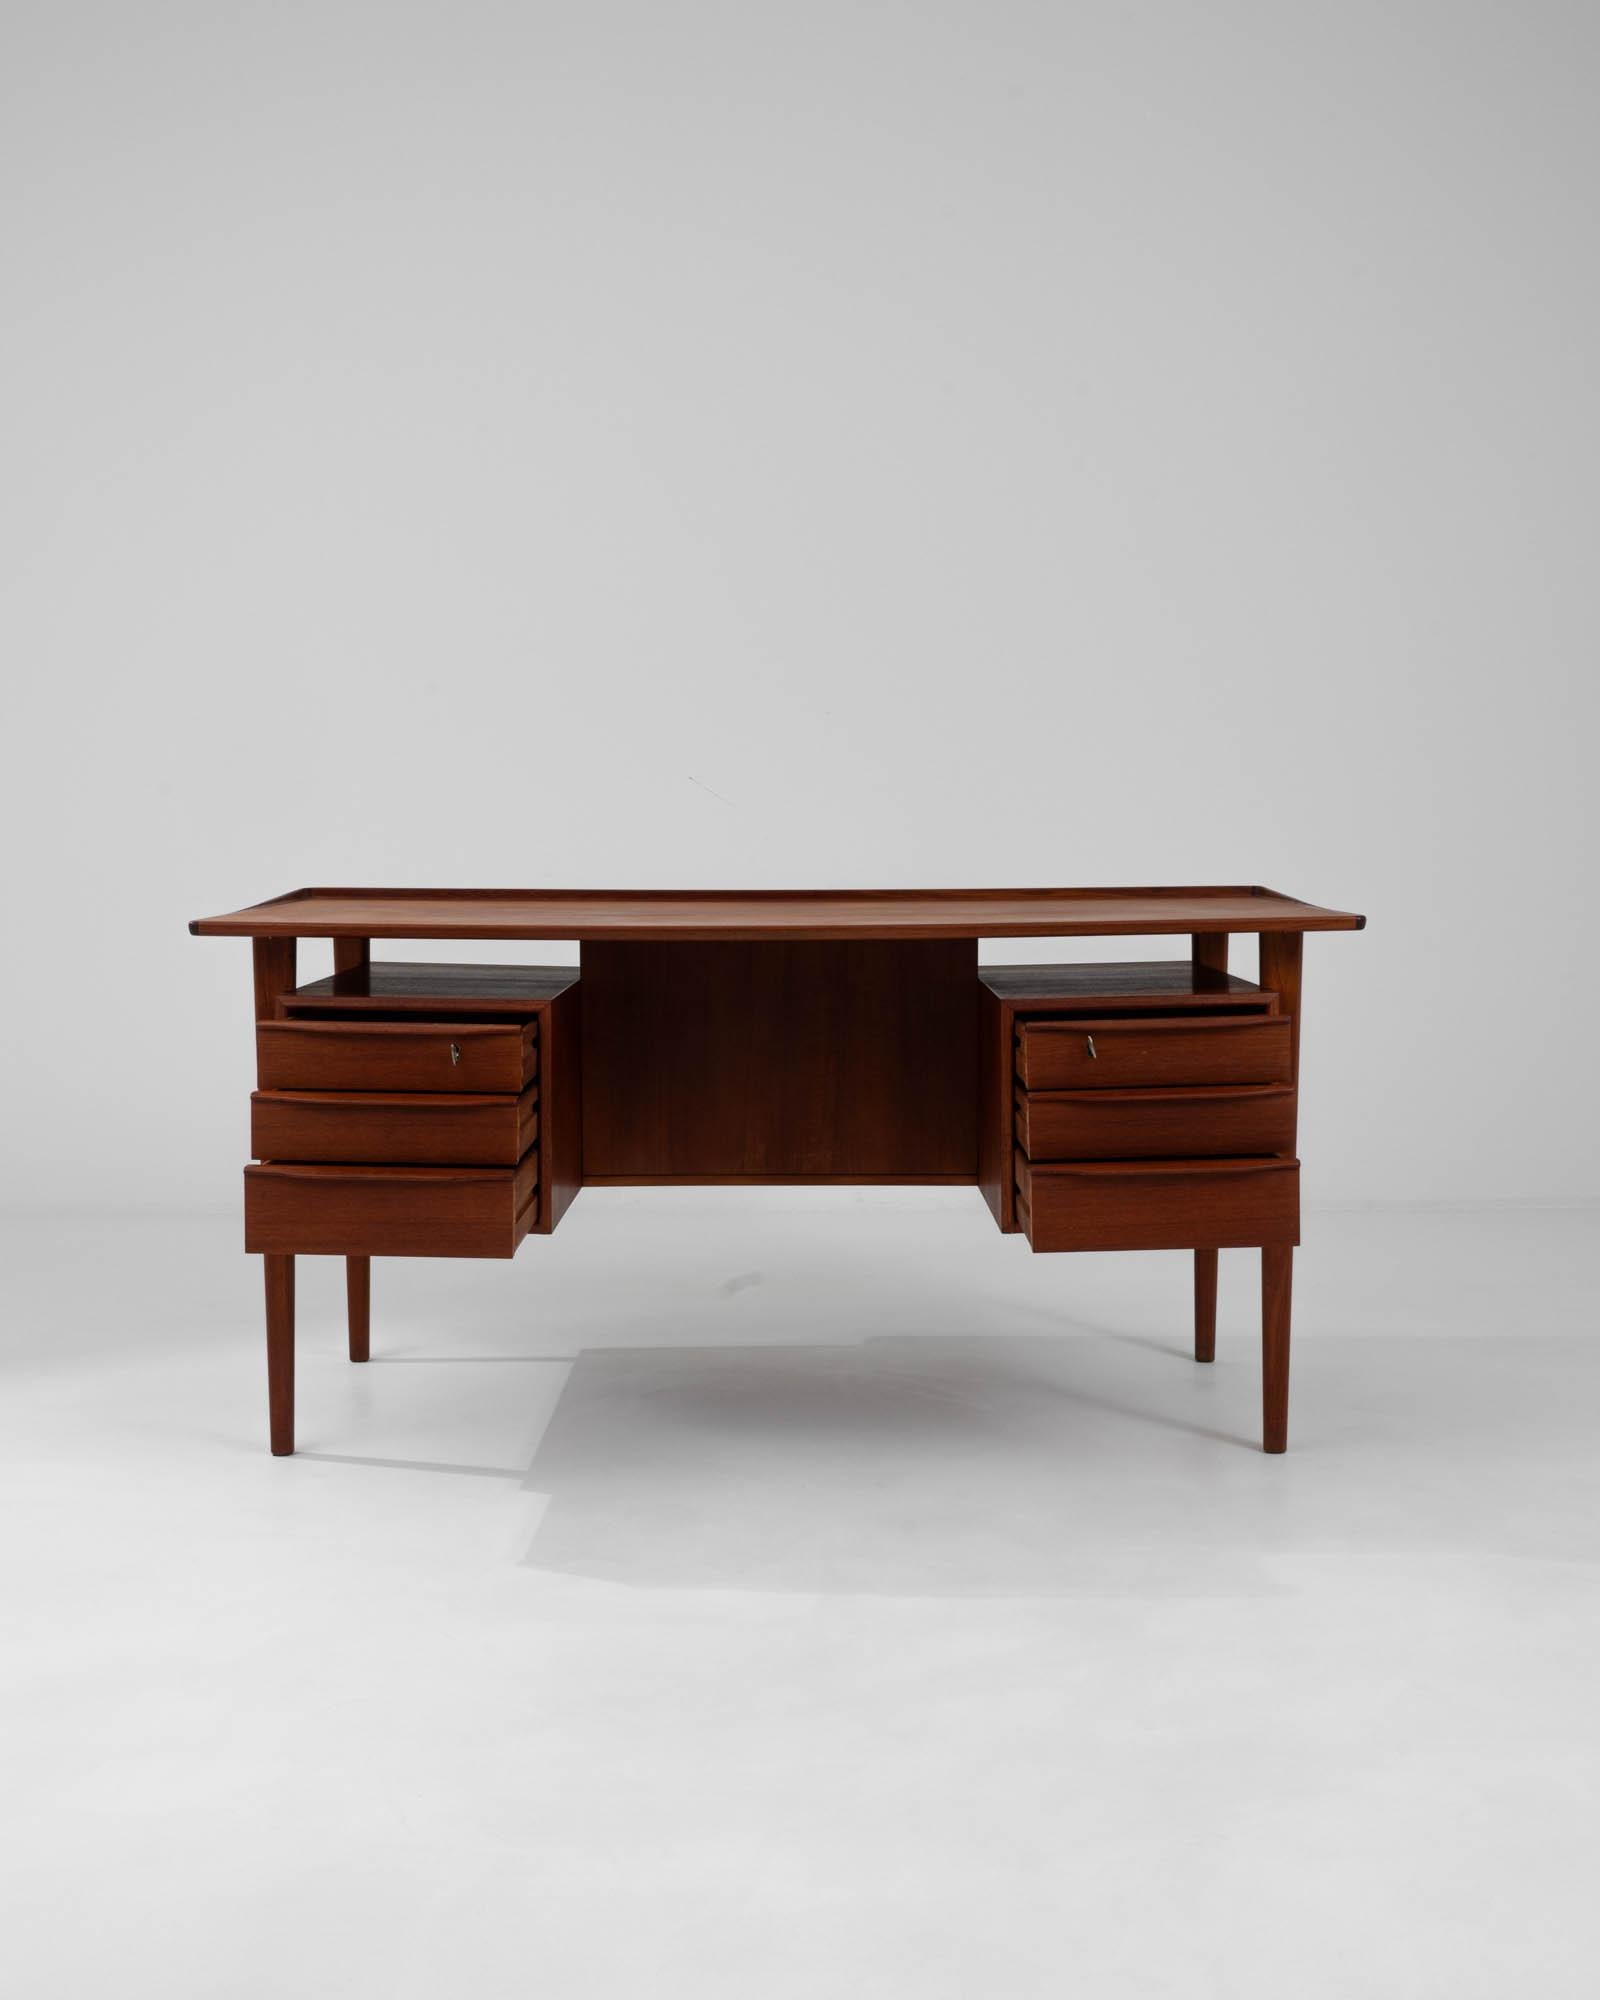 20th Century Danish Teak Desk By Peter Løvig Nielsen In Good Condition For Sale In High Point, NC